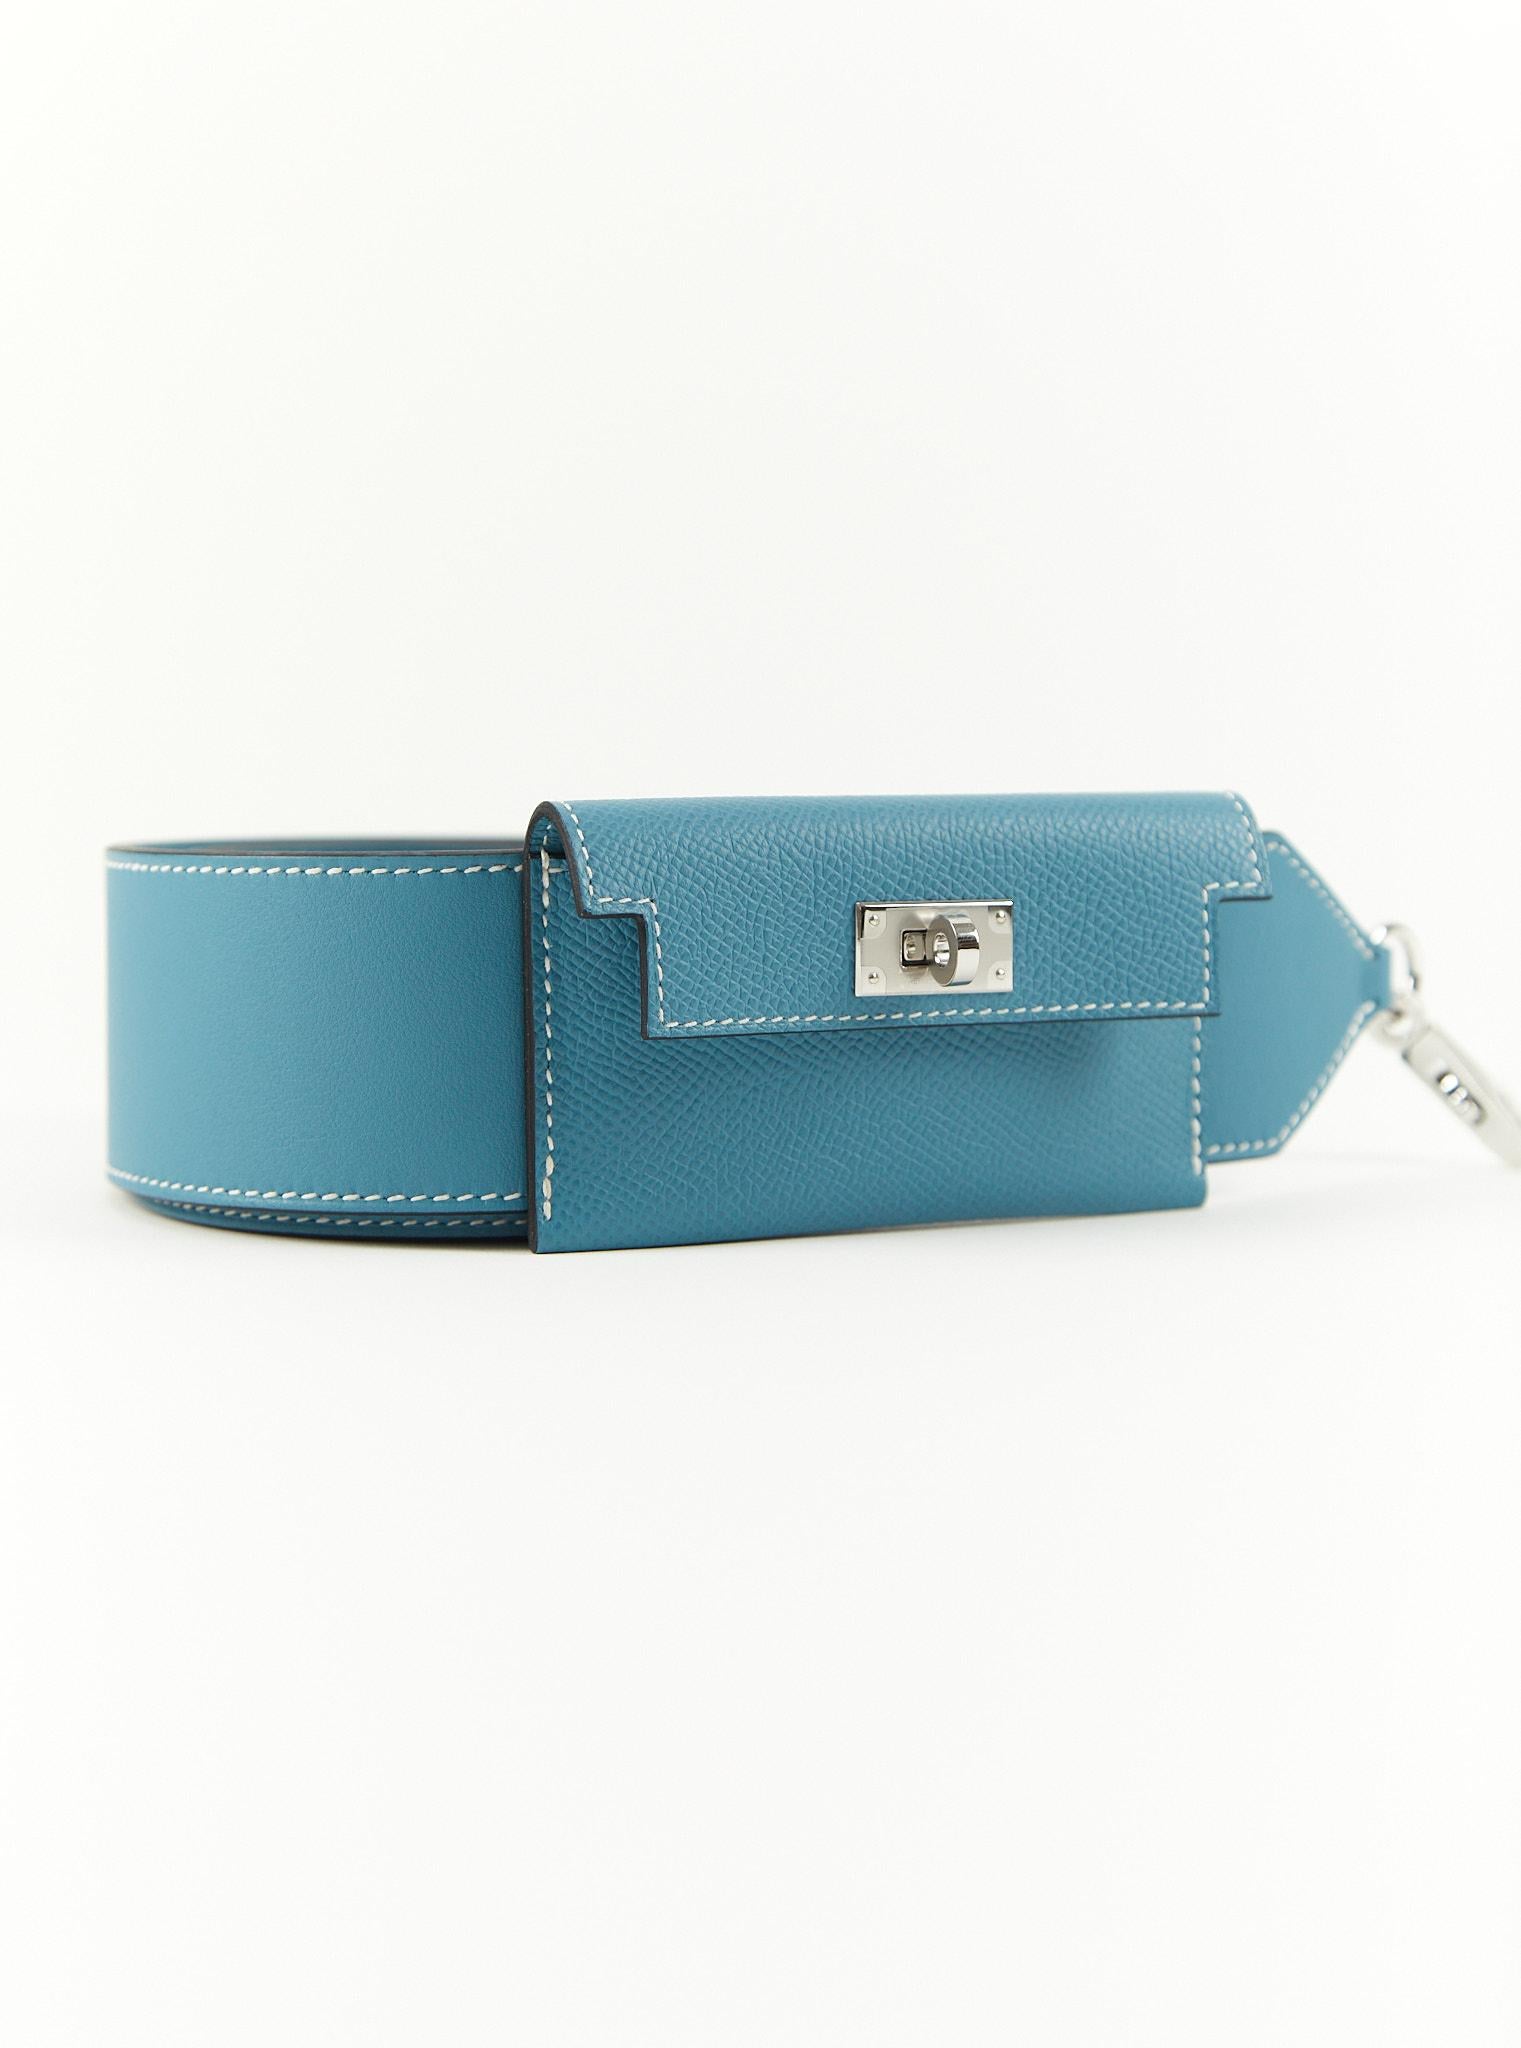 Hermès Kelly Pocket Strap 105cm in Blue Jean

Epsom and Swift Leather With Palladium Hardware

W Stamp / No Receipt 

The 105cm is the longest length strap and enables most people to wear the bag crossbody, as well as on the shoulder

Accompanied